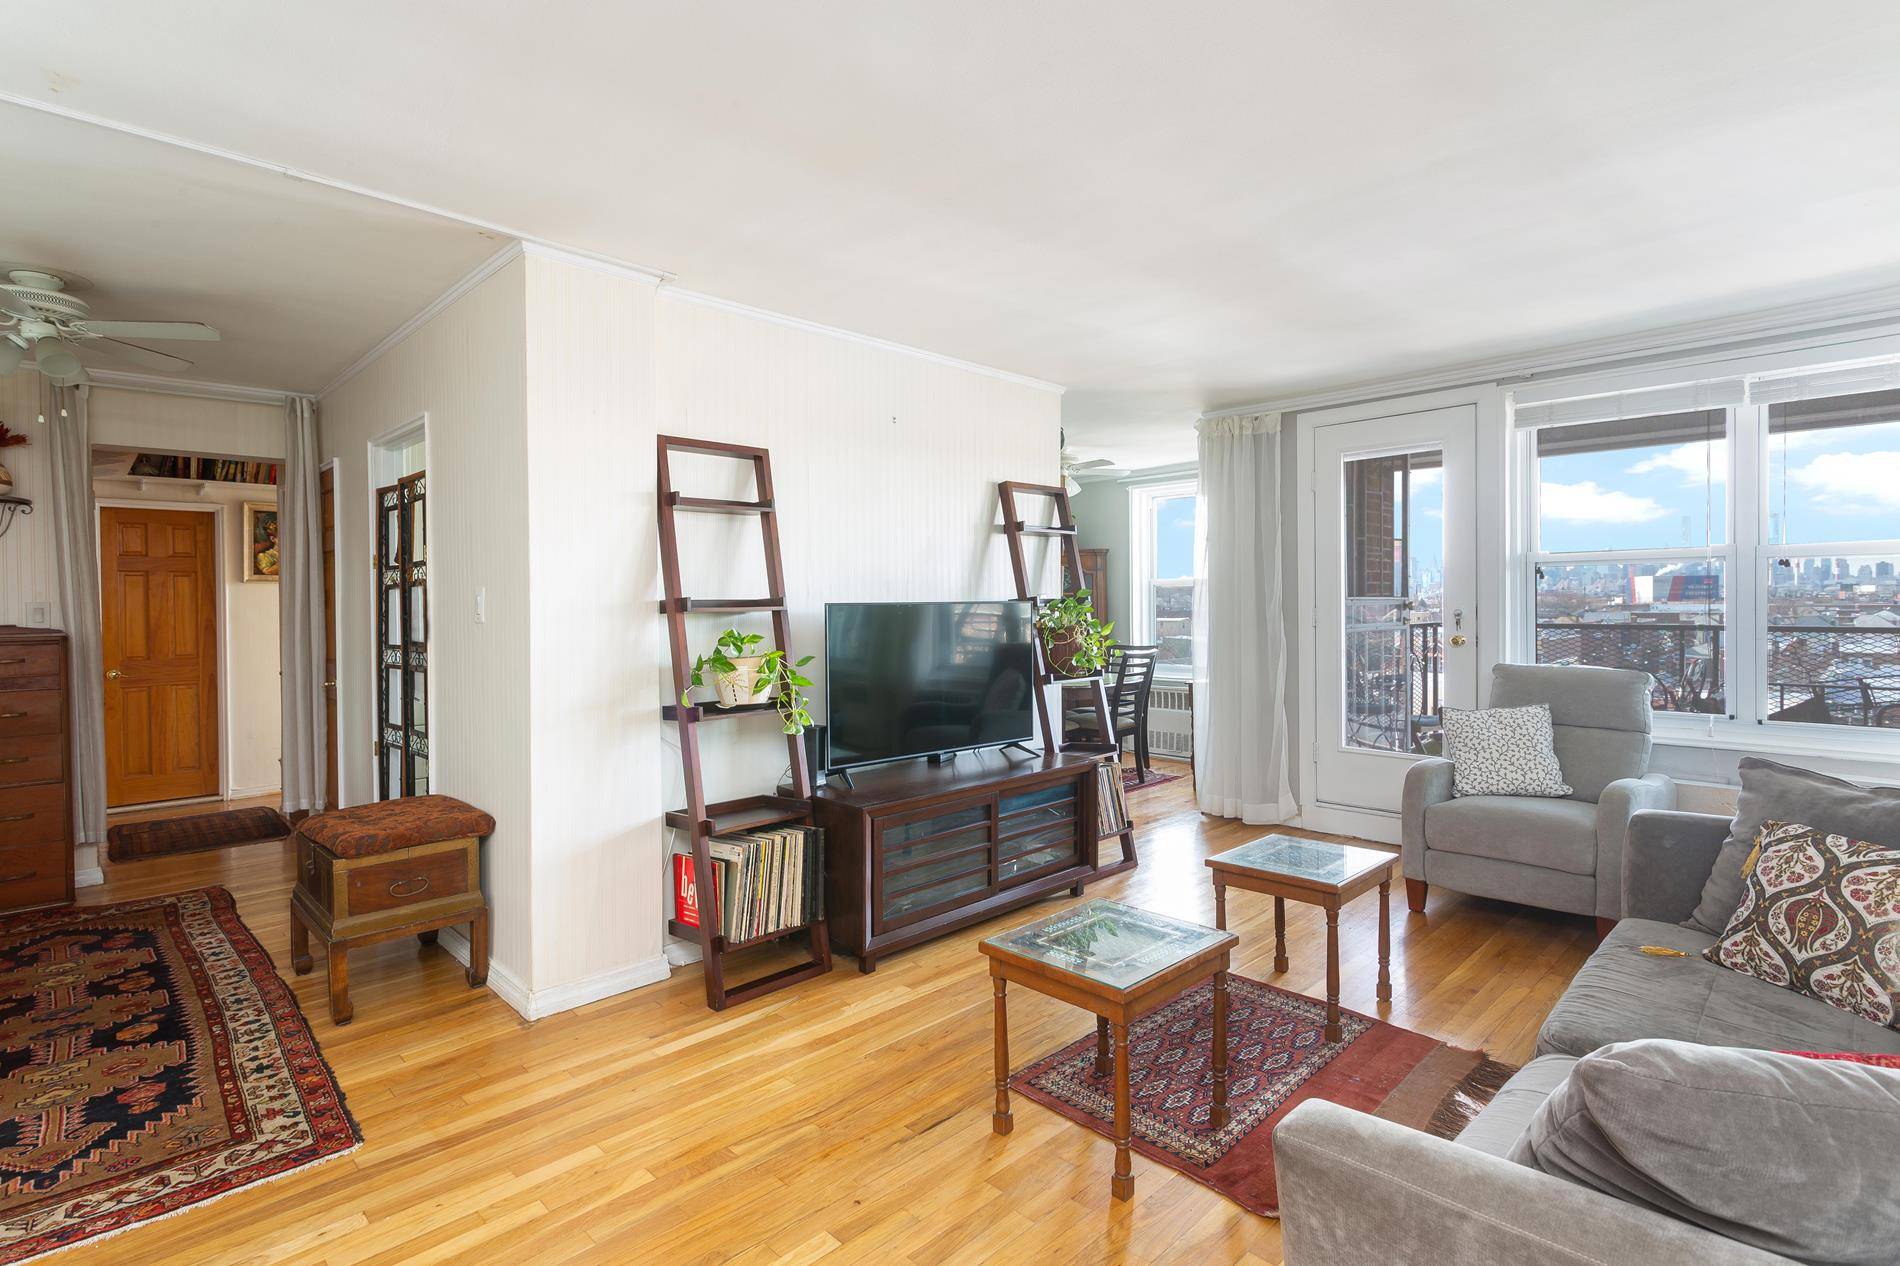 This charming and bright two bedroom, two bathroom co op home in Woodside has an updated kitchen with stainless appliances and a dining alcove with views of the Manhattan skyline.